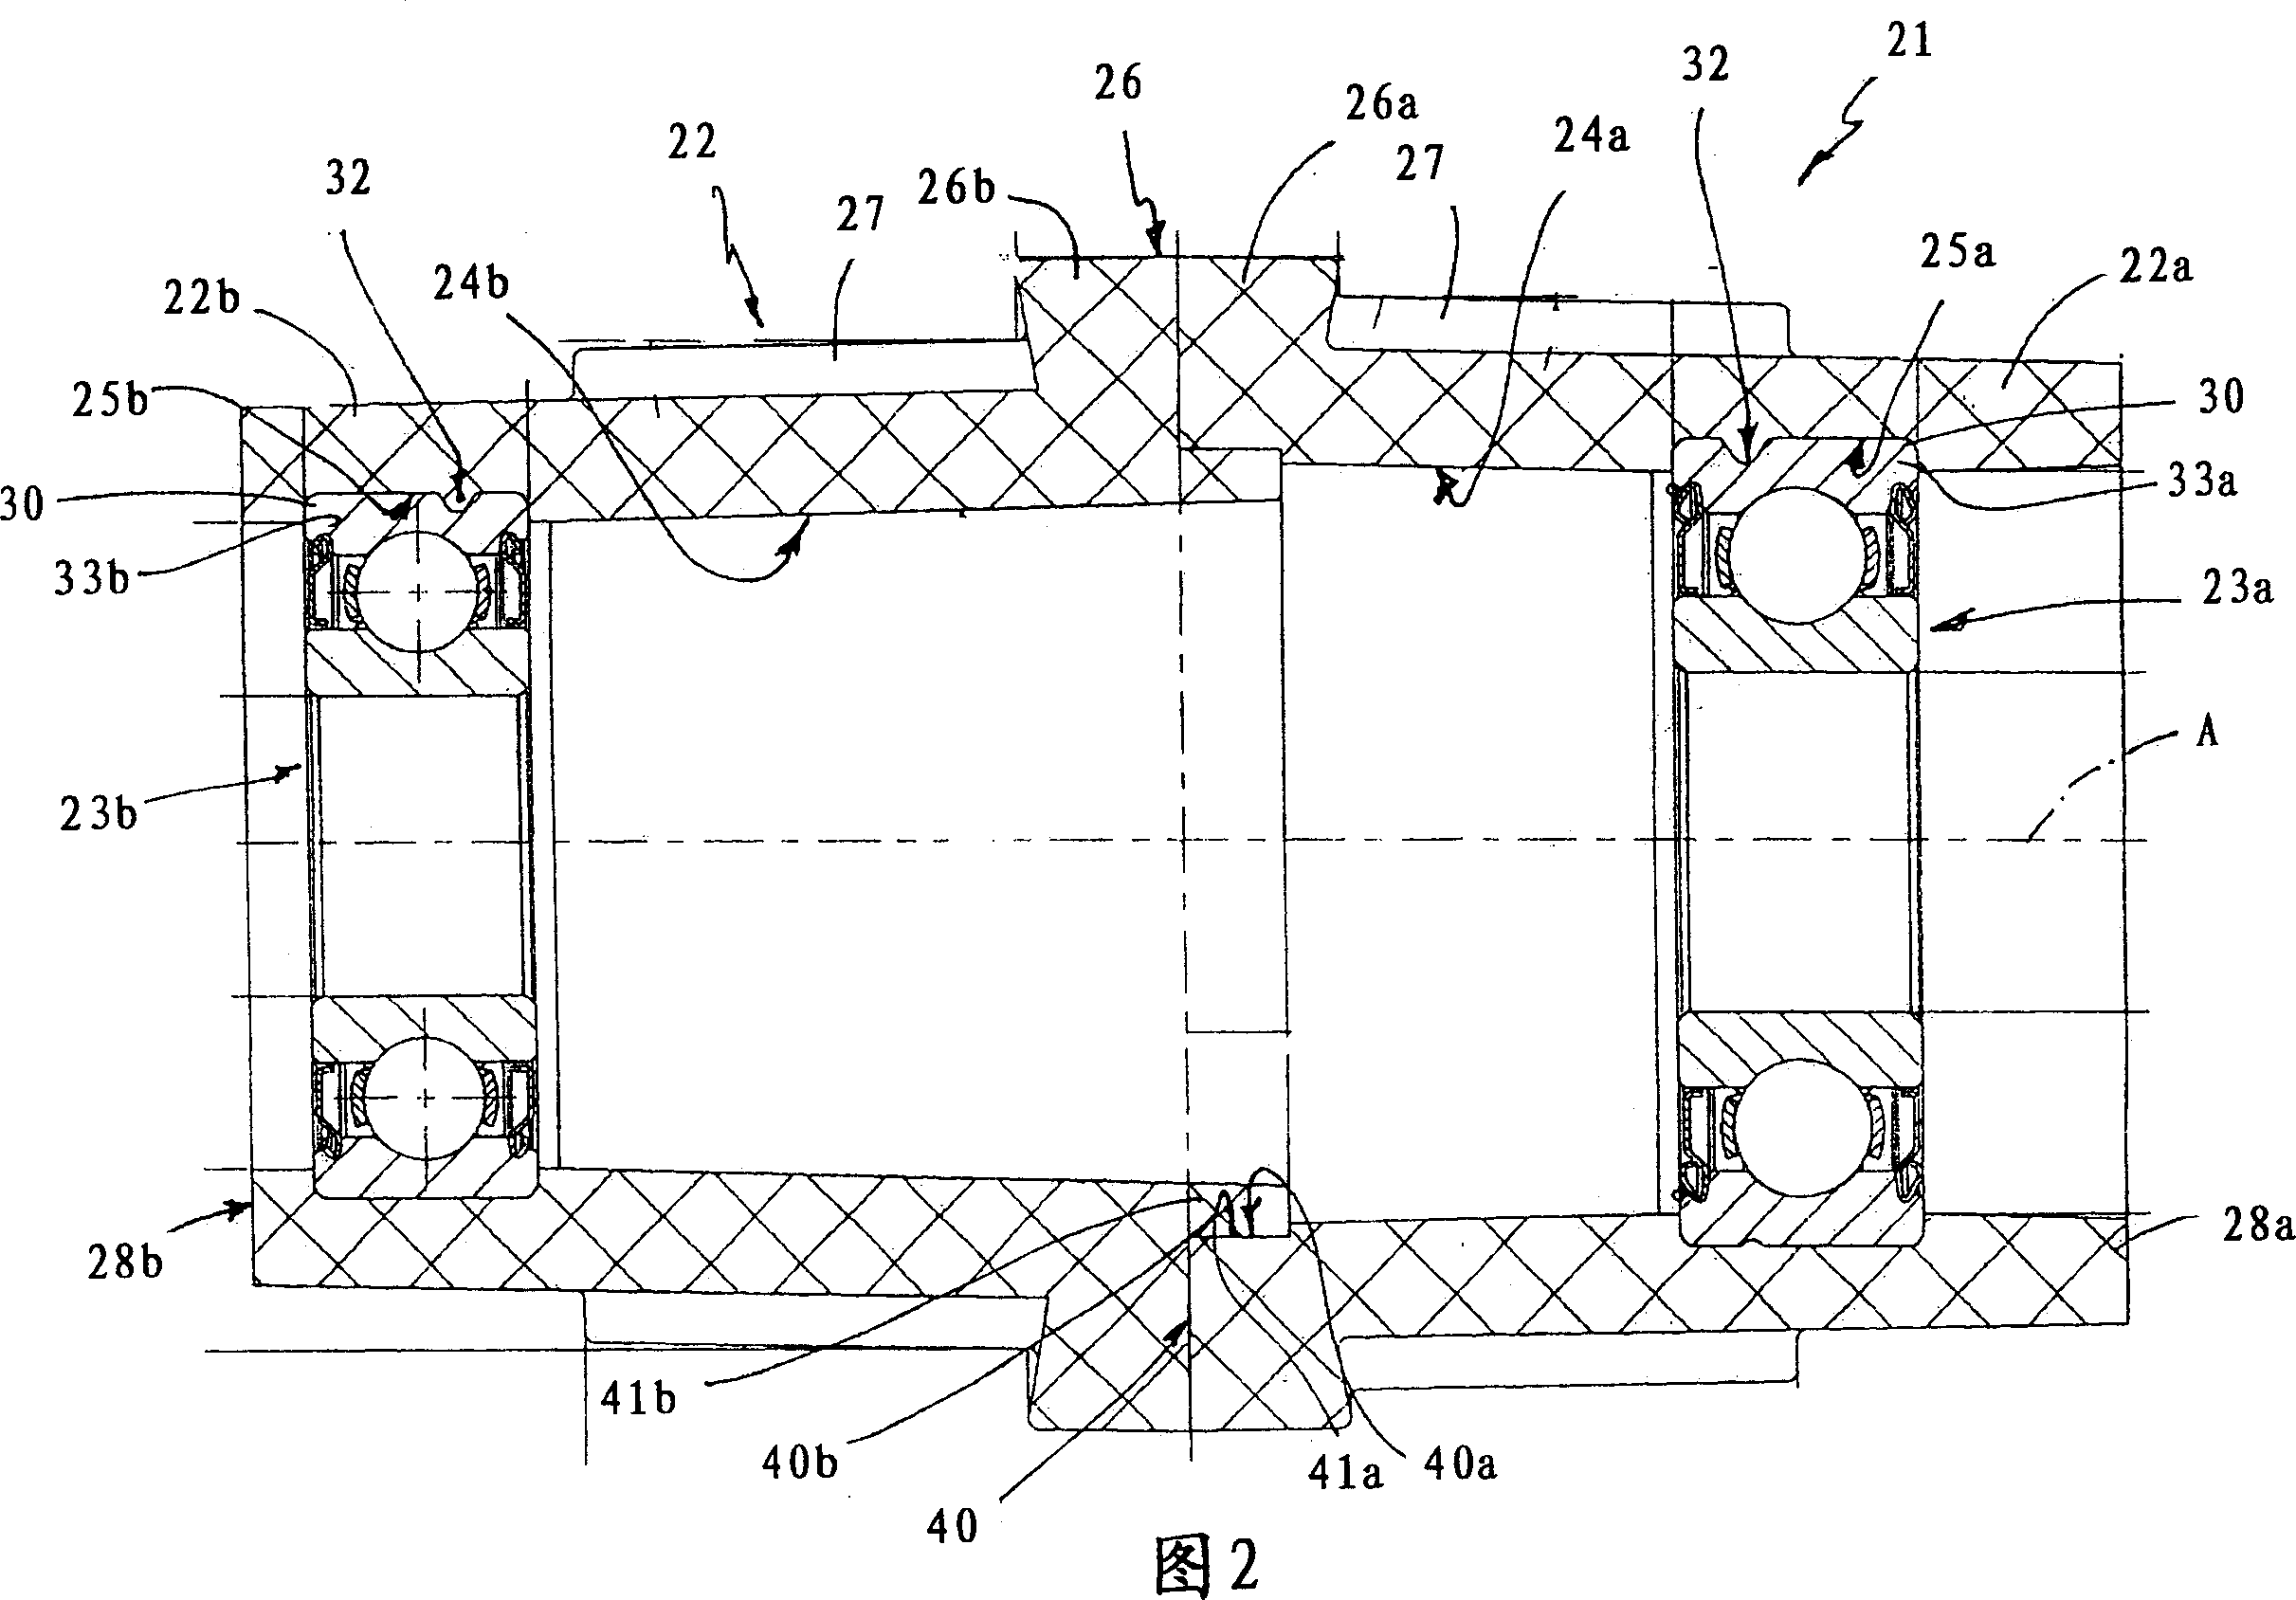 Bearing-holder support for rotating elements